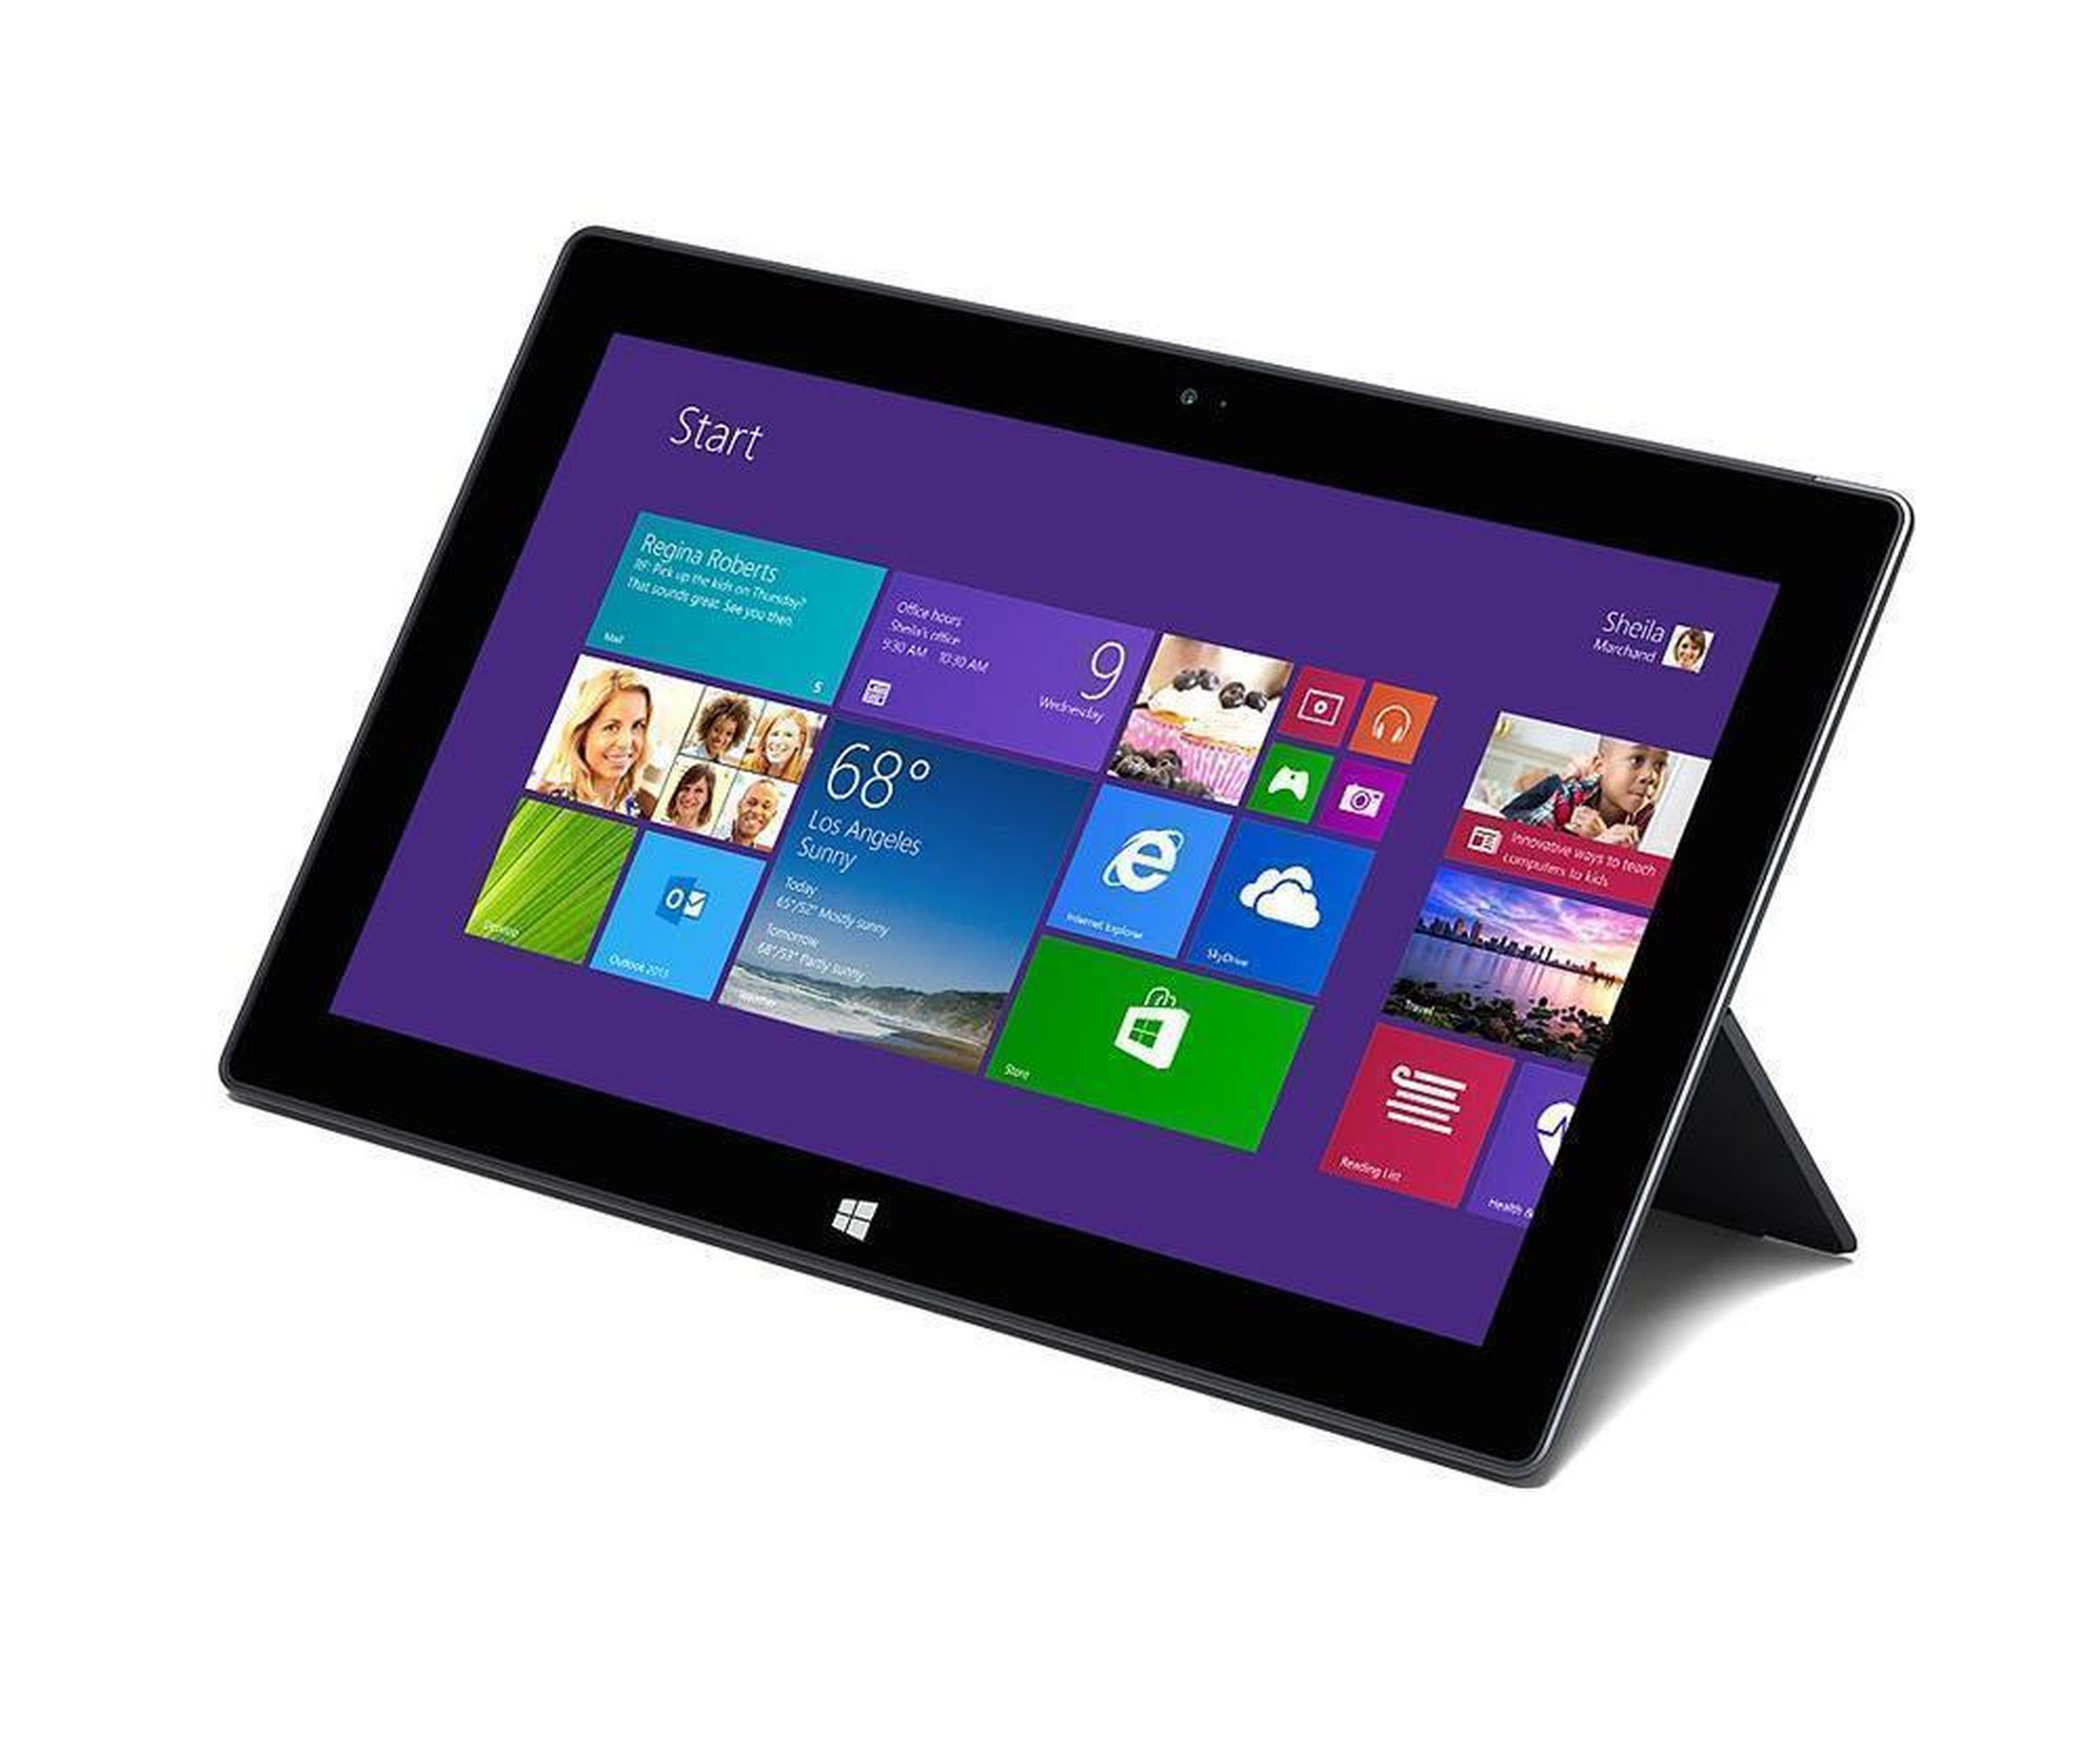 Microsoft Surface Pro 2 - Tablet - Intel Core i5-4200 / 1.60 GHz - 4 GB - 128GB SSD - 10.6